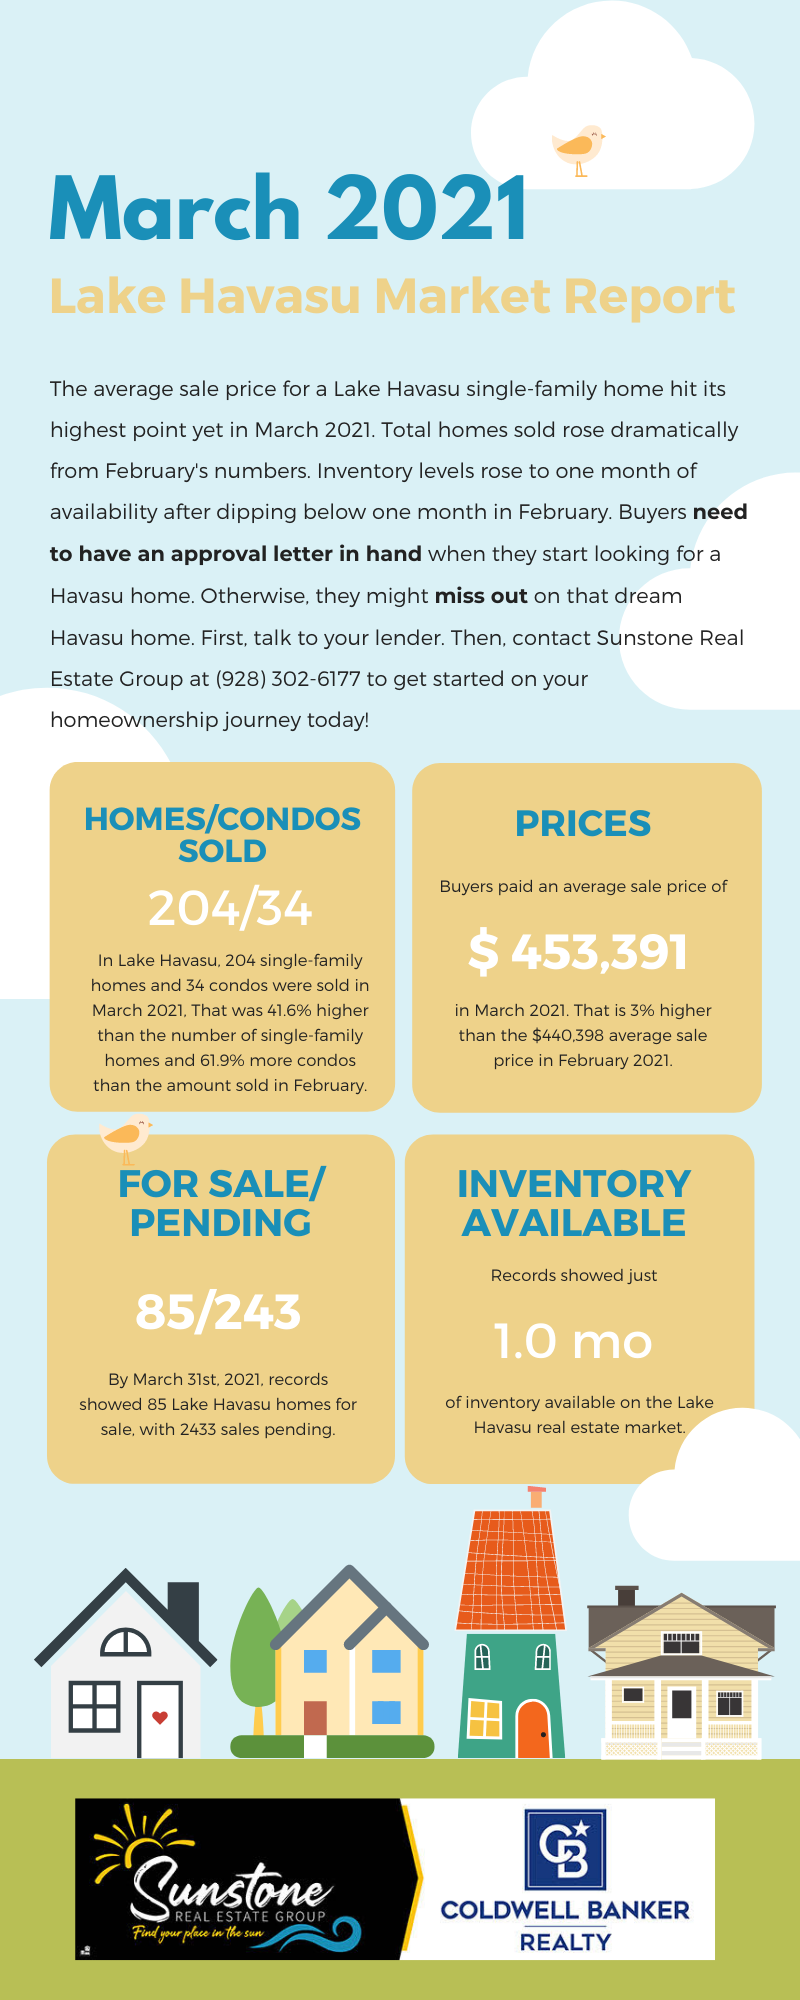 The March 2021 Lake Havasu Market Report showed the highest ever average sale price for single-family homes, with inventory rising just a tick, and total monthly home sales rising significantly from the previous month's totals. You need to get your pre-approval letter ready before you put in your offer or you just might lose out on that dream home.